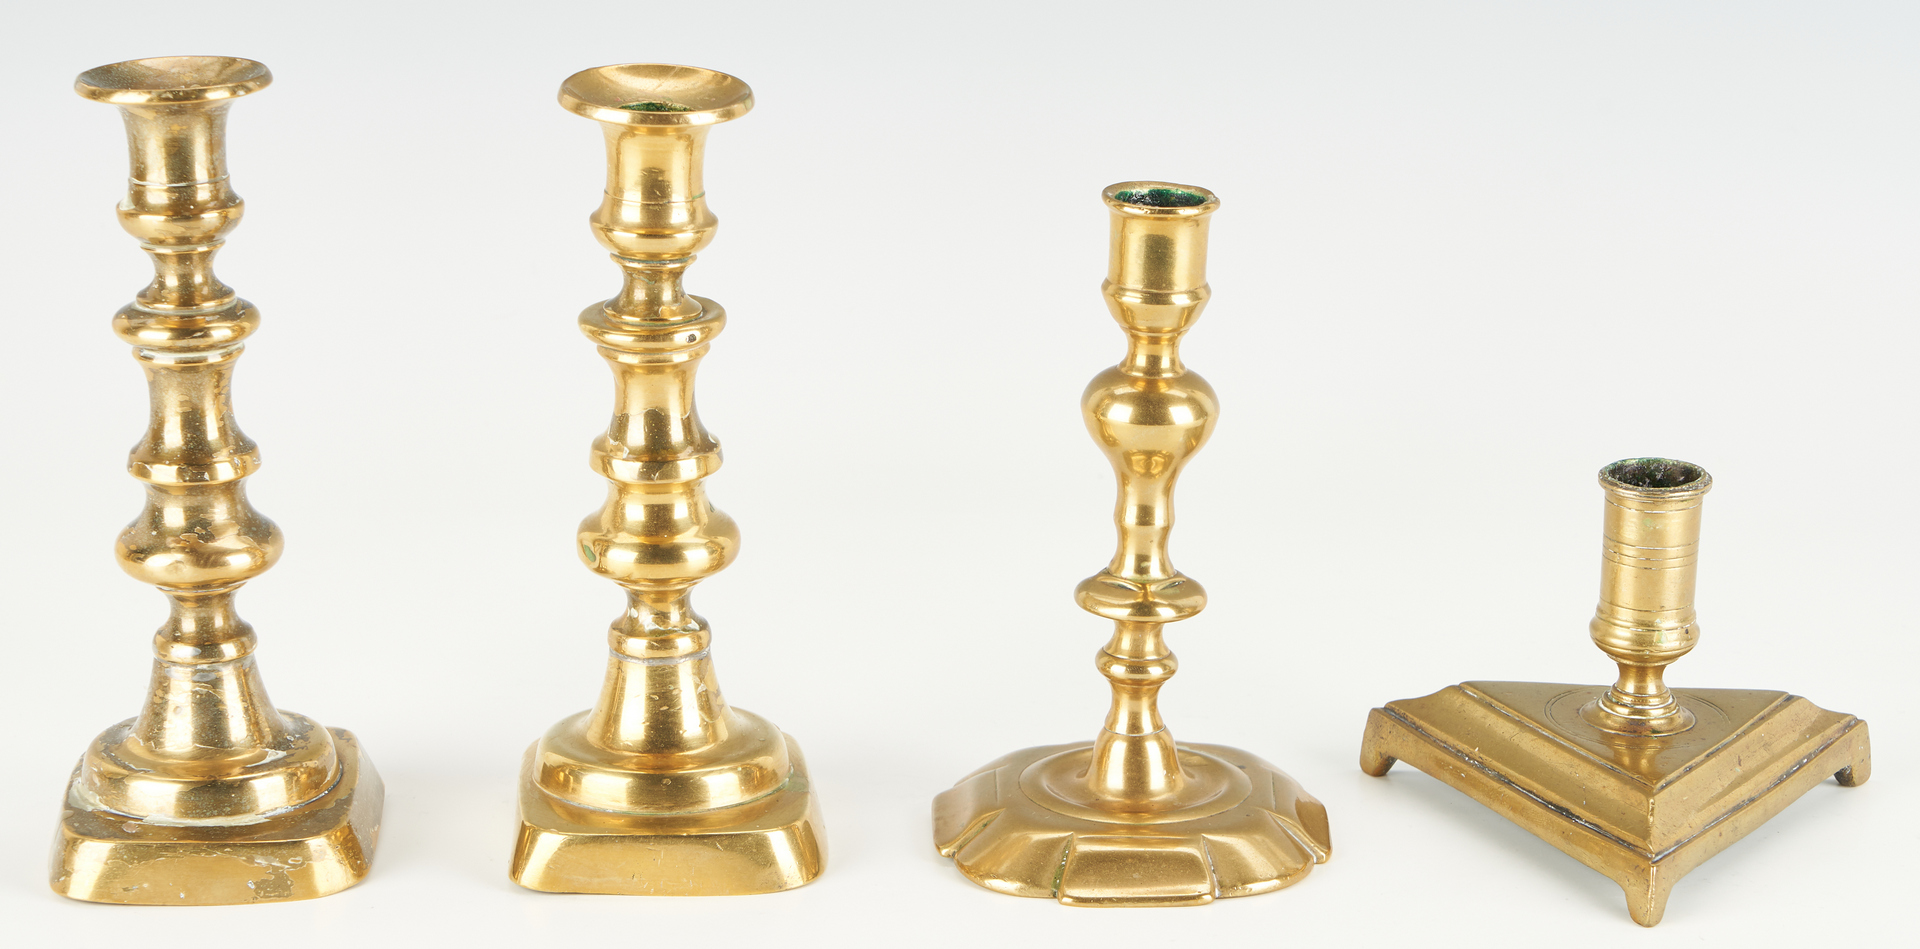 Lot 452: Collection of 10 Antique Brass Candlesticks